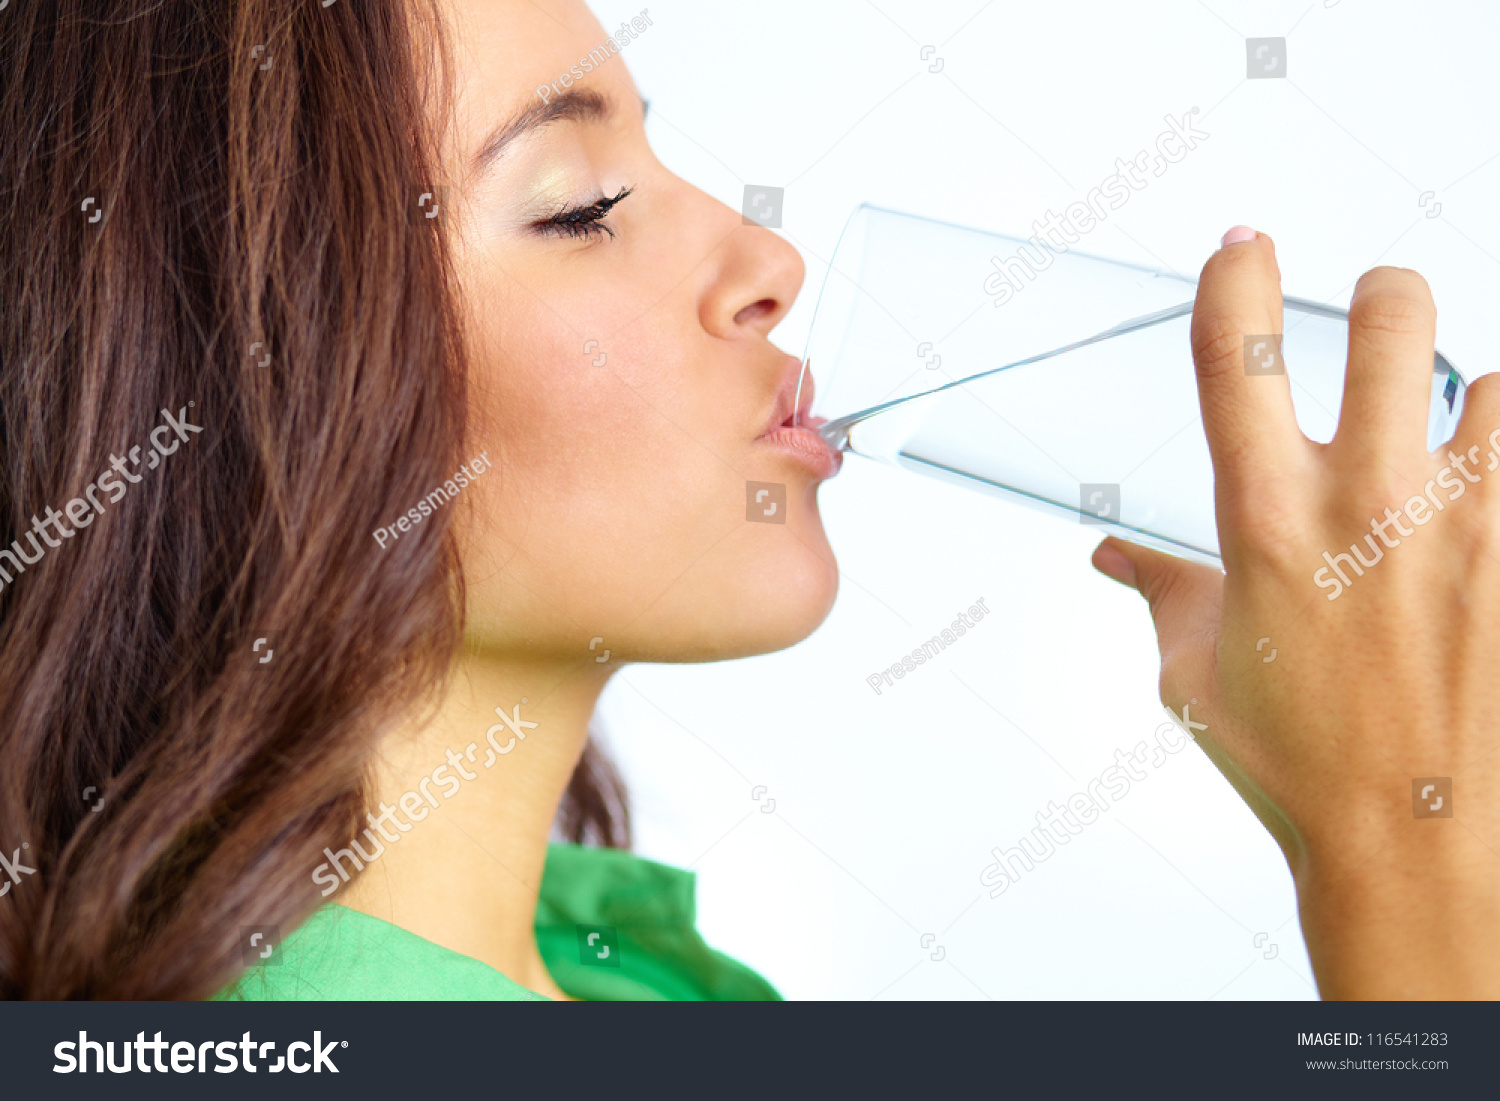 Close-up of pretty girl drinking water from glass #116541283